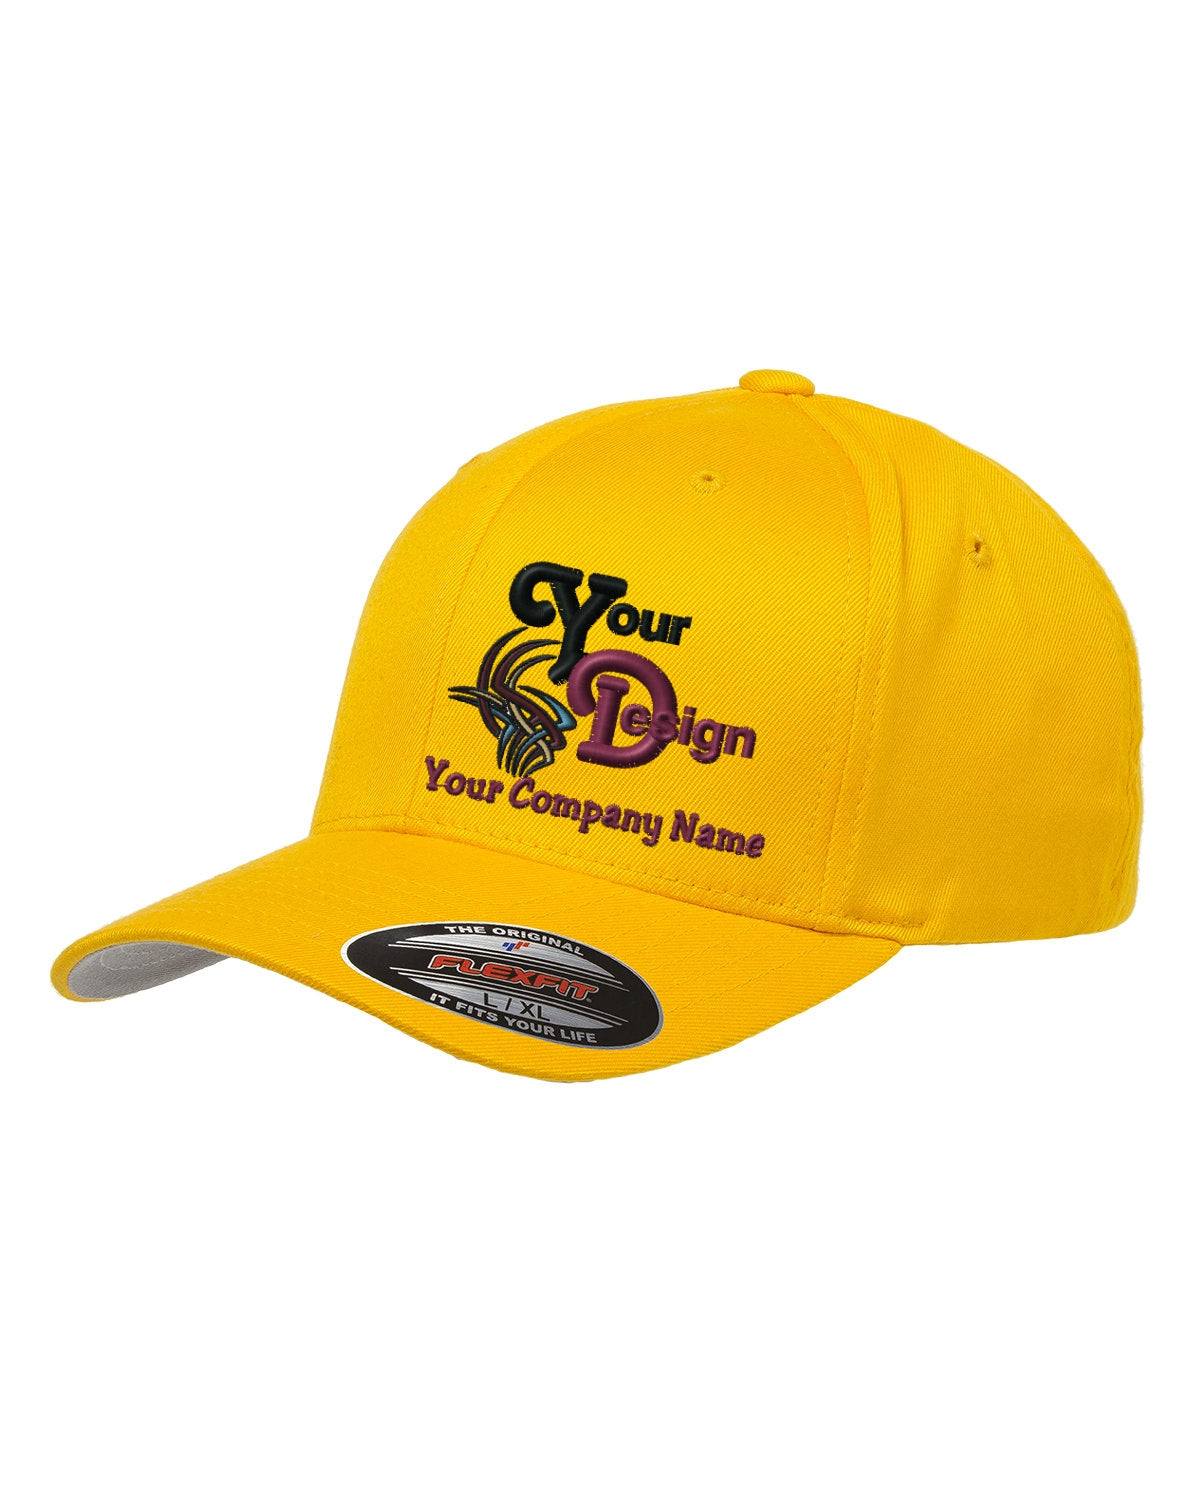 Flex Fitted Ball Cap with Your Company Logo Embroidered - yellow gold